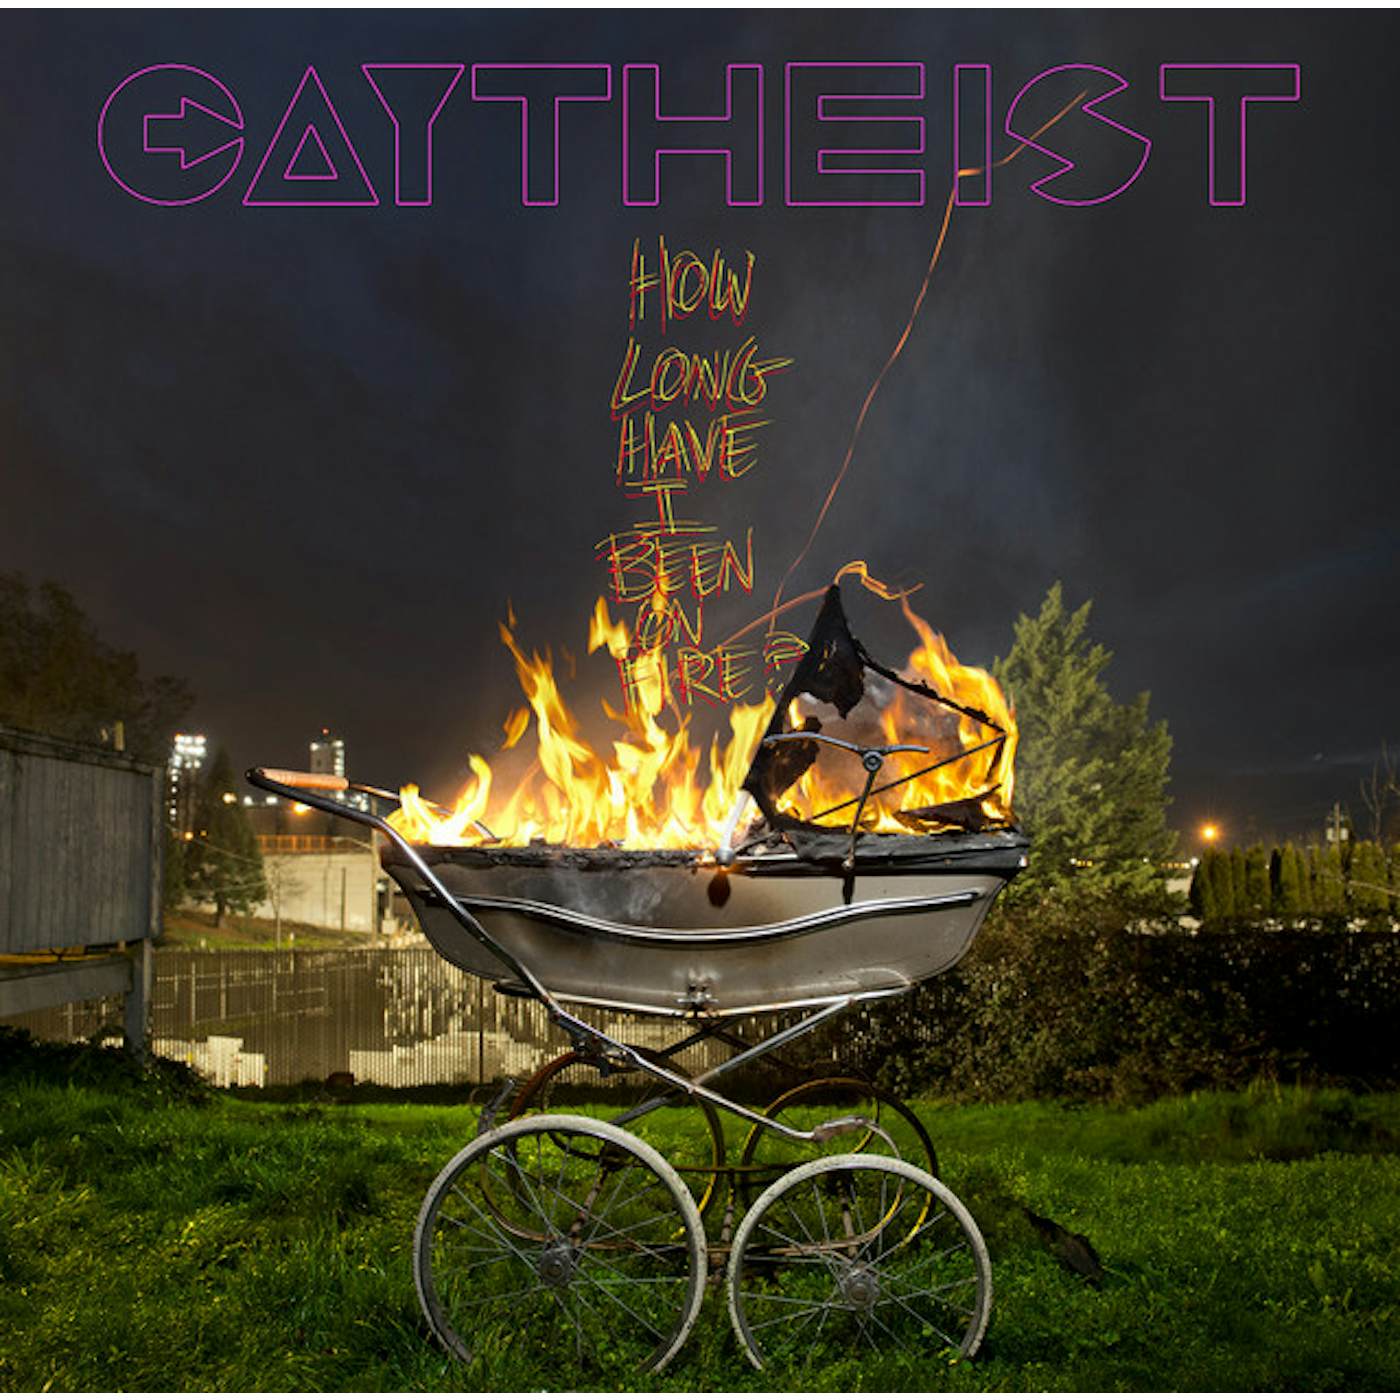 Gaytheist HOW LONG HAVE I BEEN ON FIRE? CD